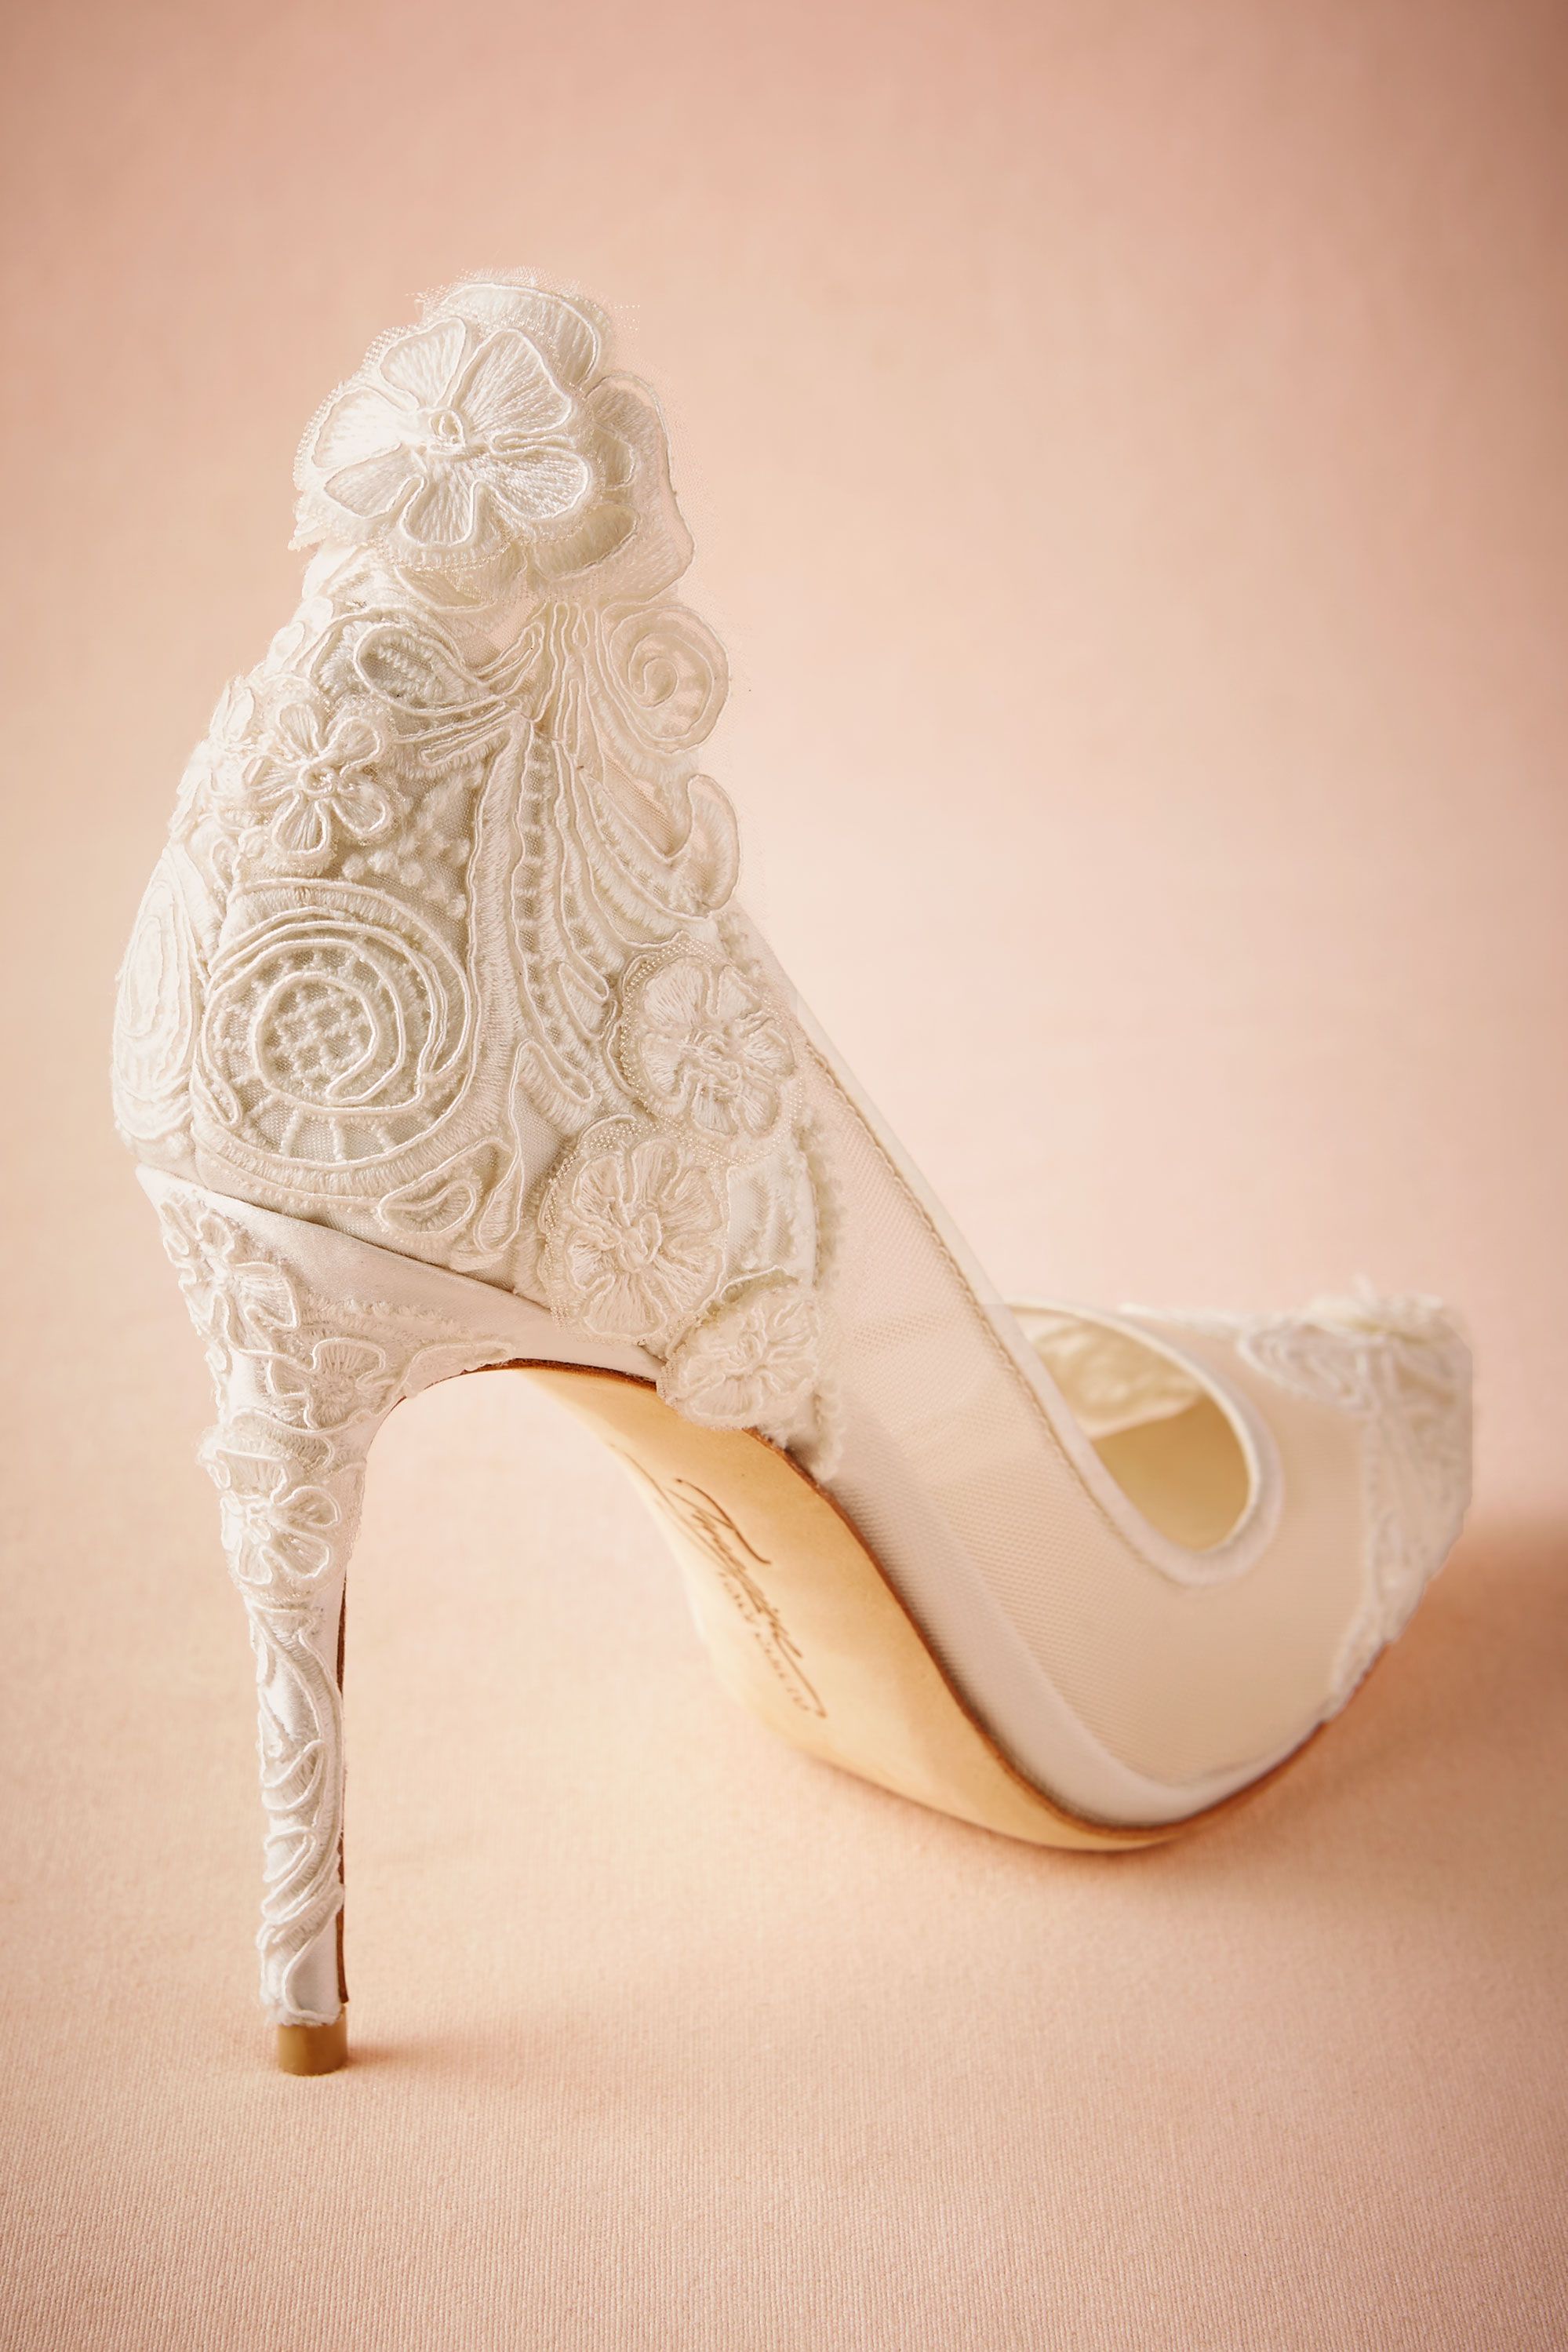 vince camuto ivory shoes